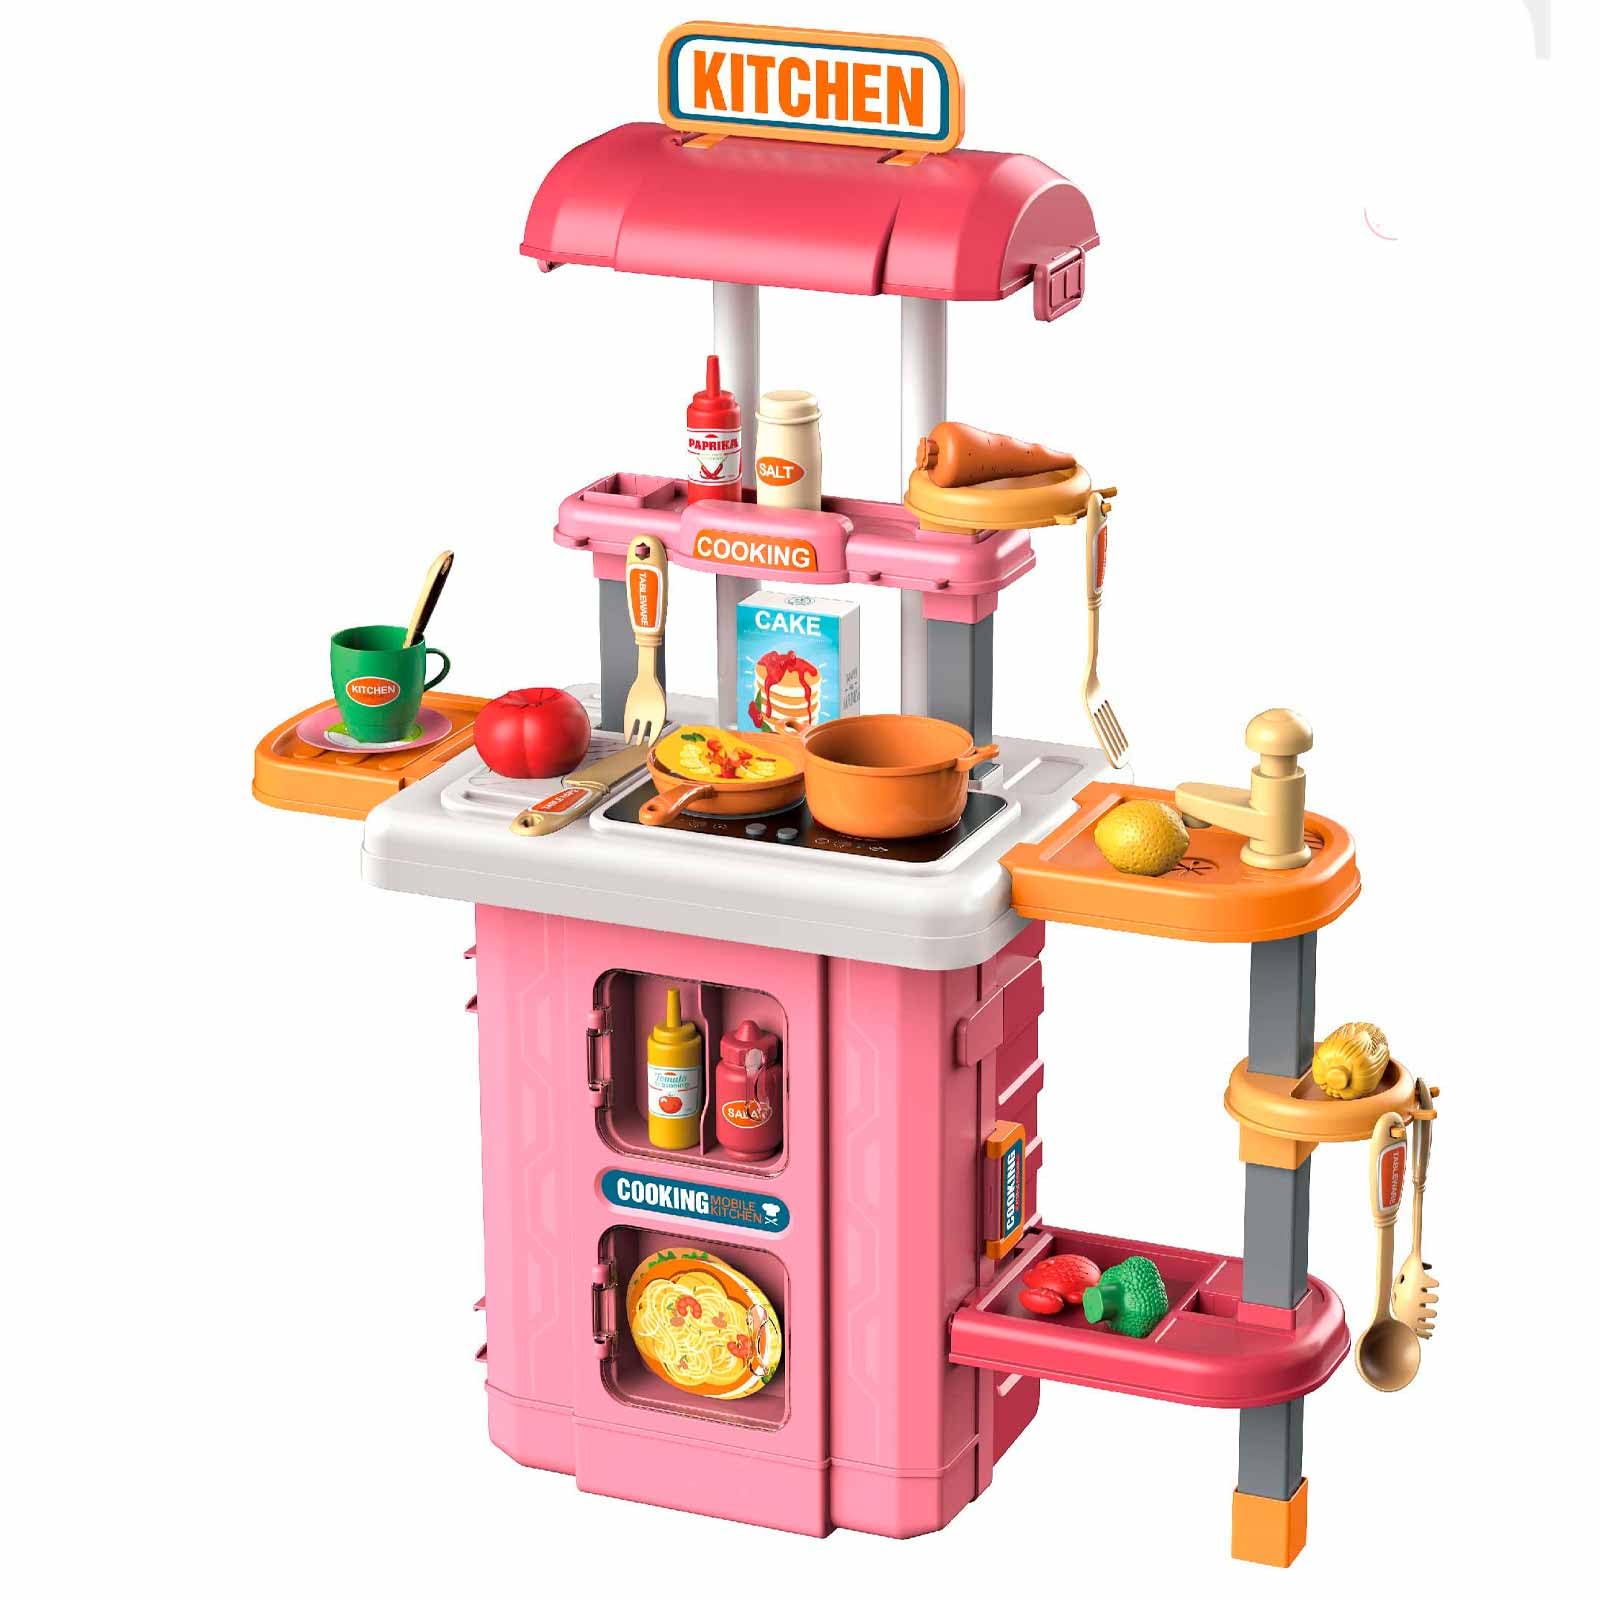 MUGEYMYD Kids Kitchen Playset for Toddlers 3-10 Years old,Pretend Play Kitchen Food Toy Accessories for boys and girls with Realistic Lights & Sounds, Play Sink, Easy to Assemble, Pink.